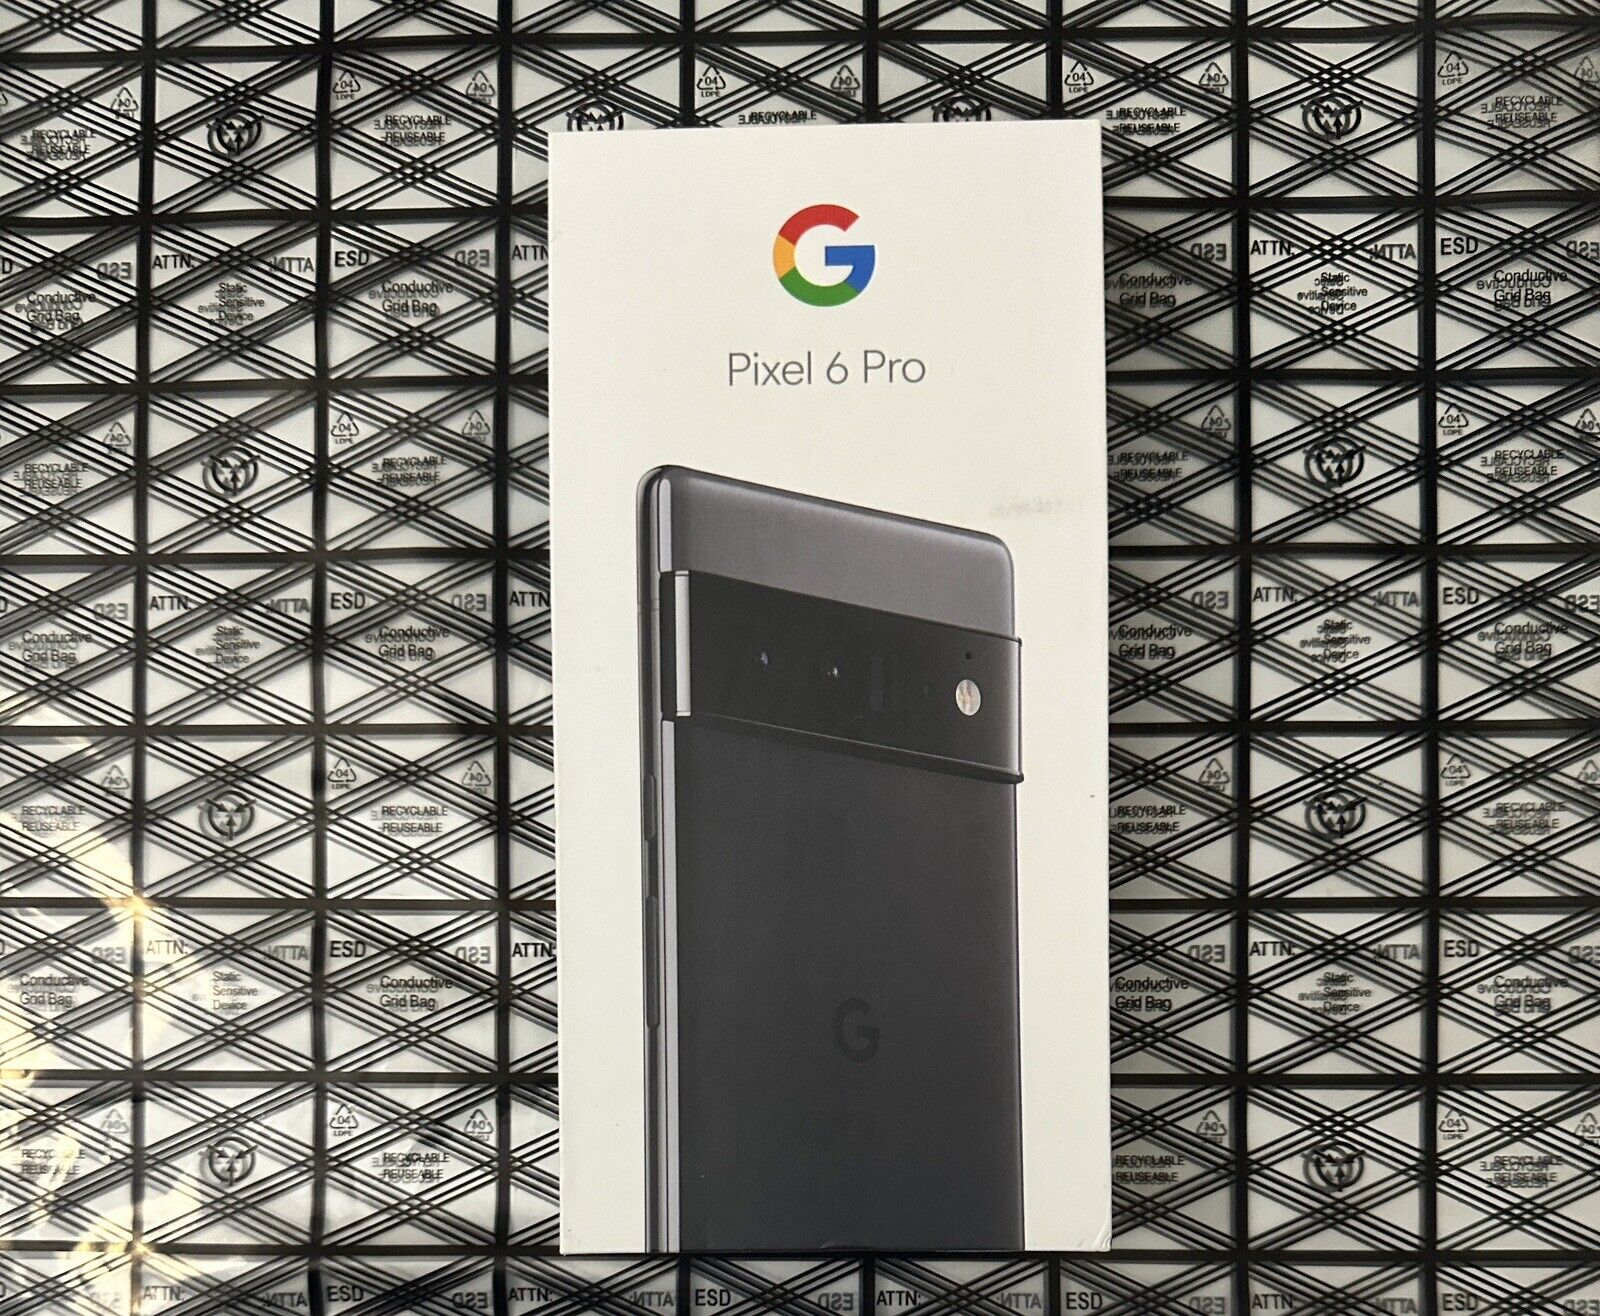 Google Pixel 6 Pro - 128GB - Stormy Black (AT&T) for sale online 